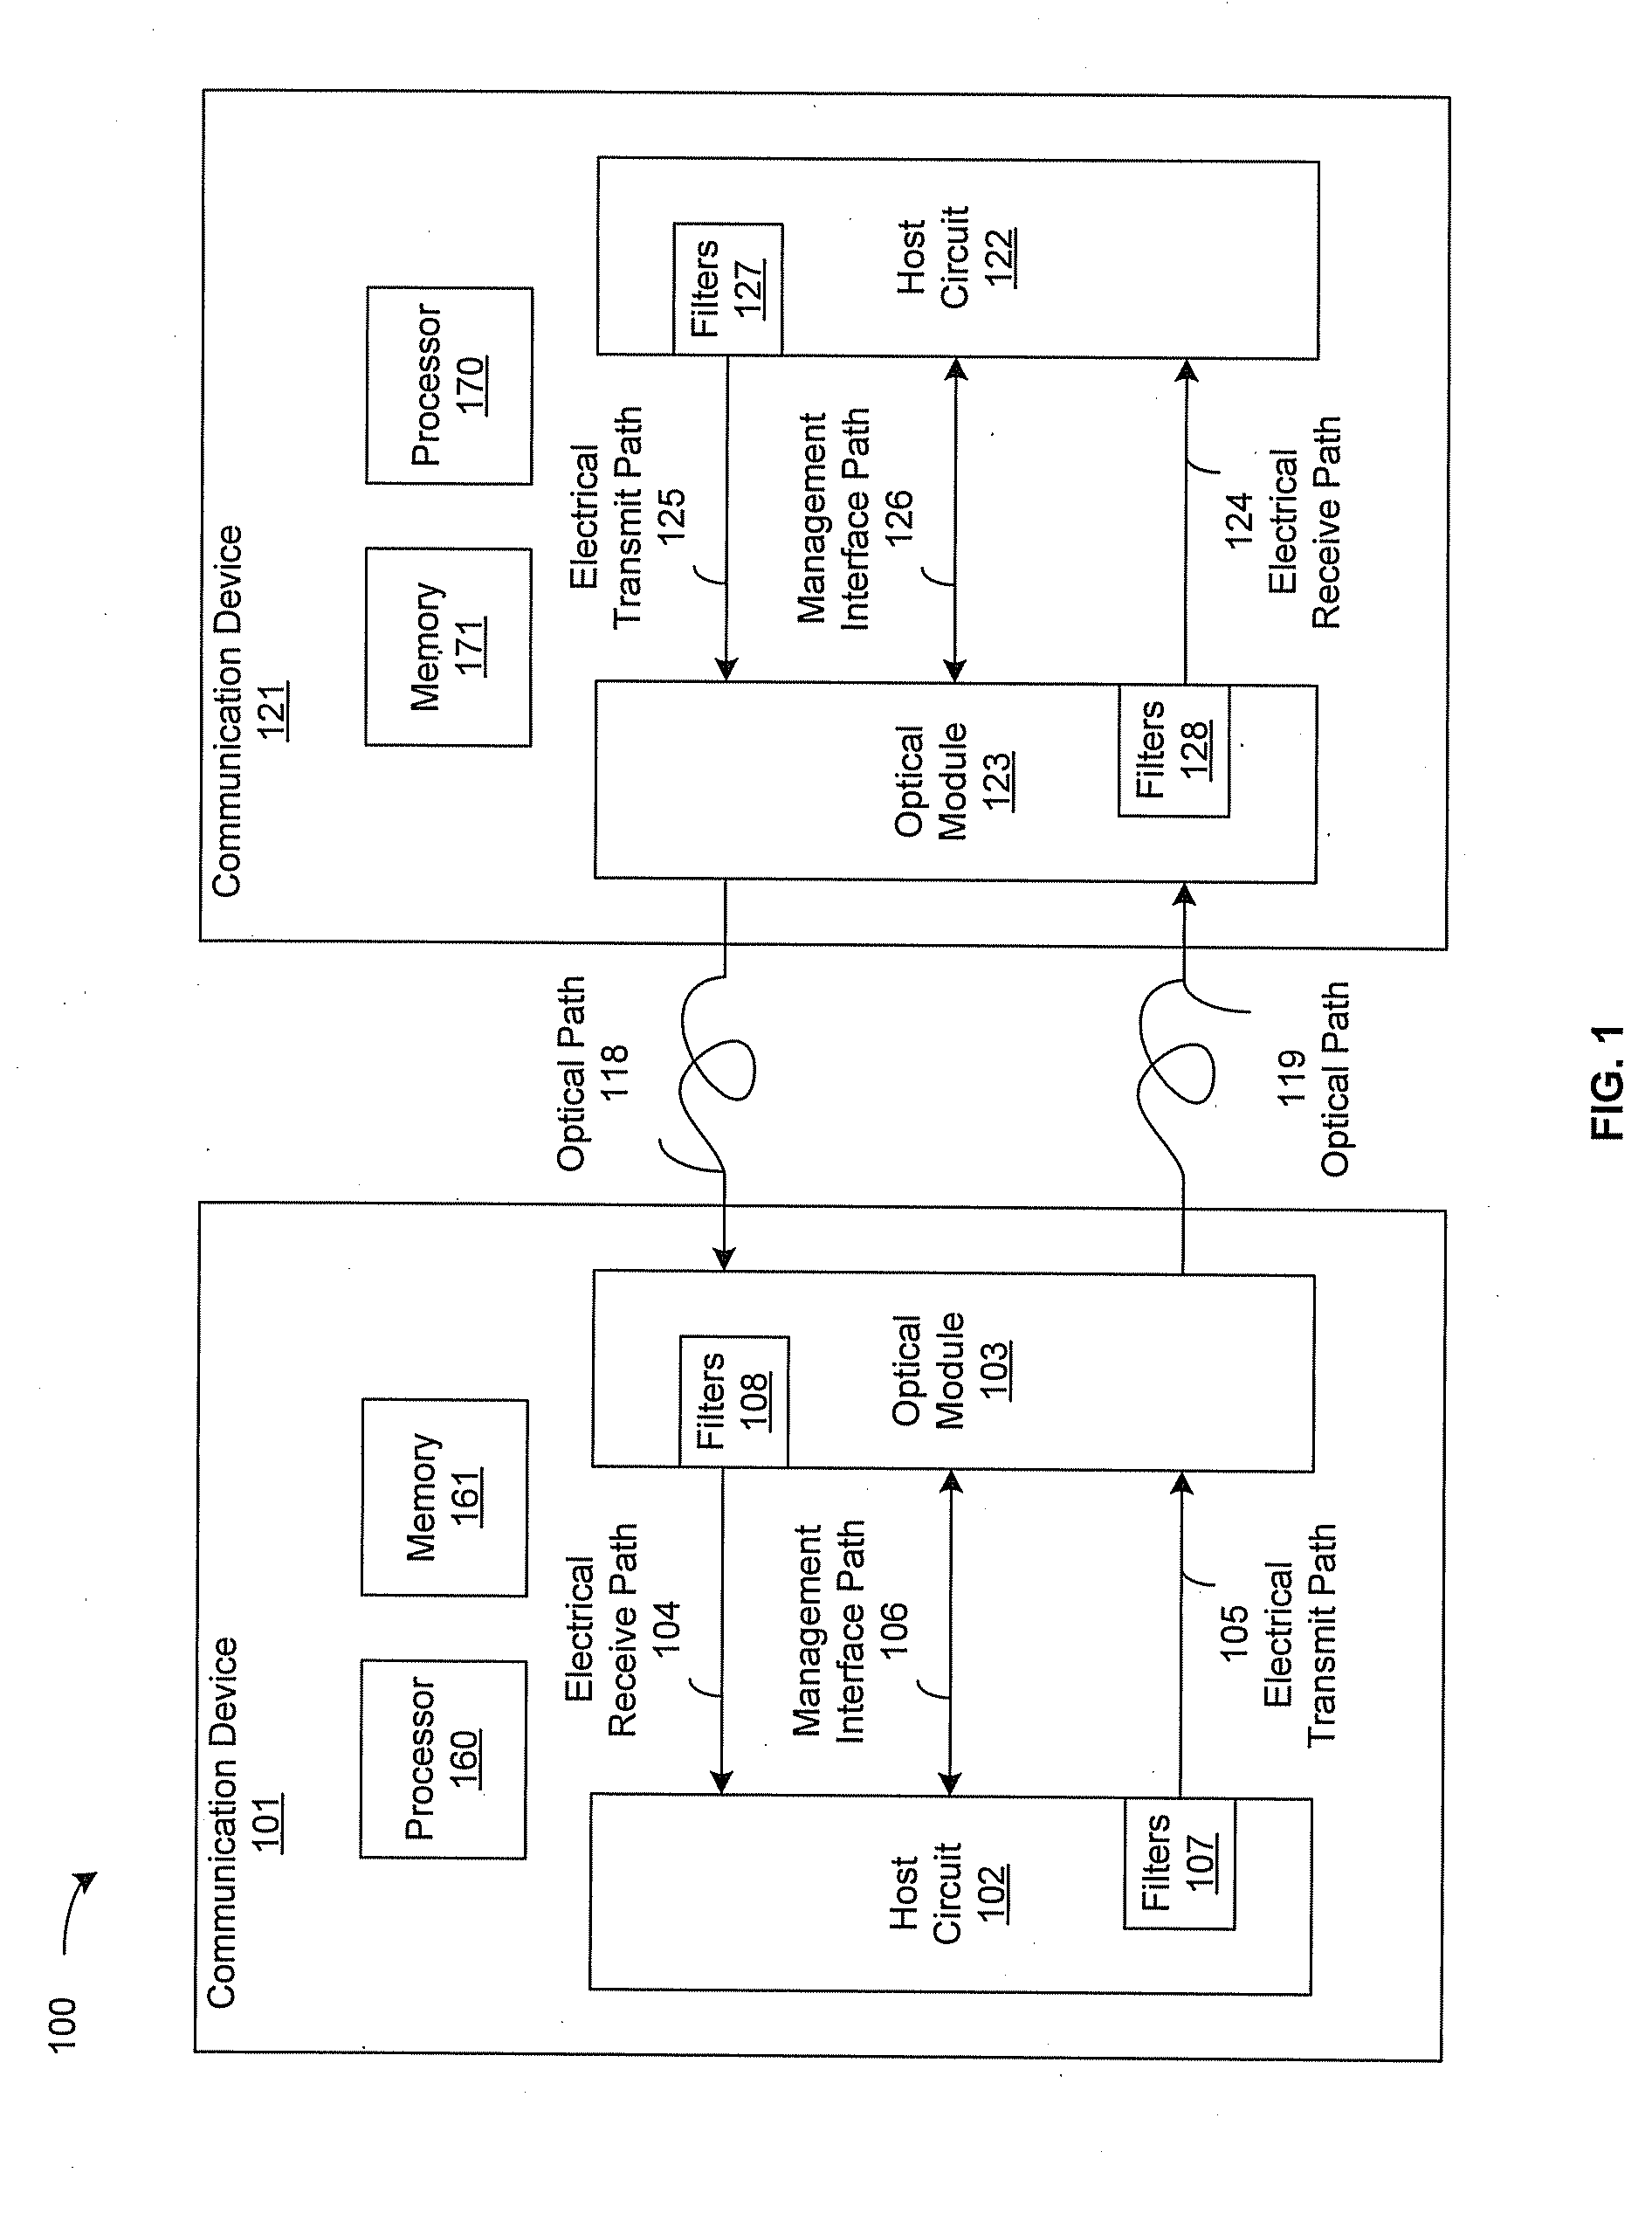 Method and System for Adaptively Setting a Transmitter Filter for a High Speed Serial Link Transmitter